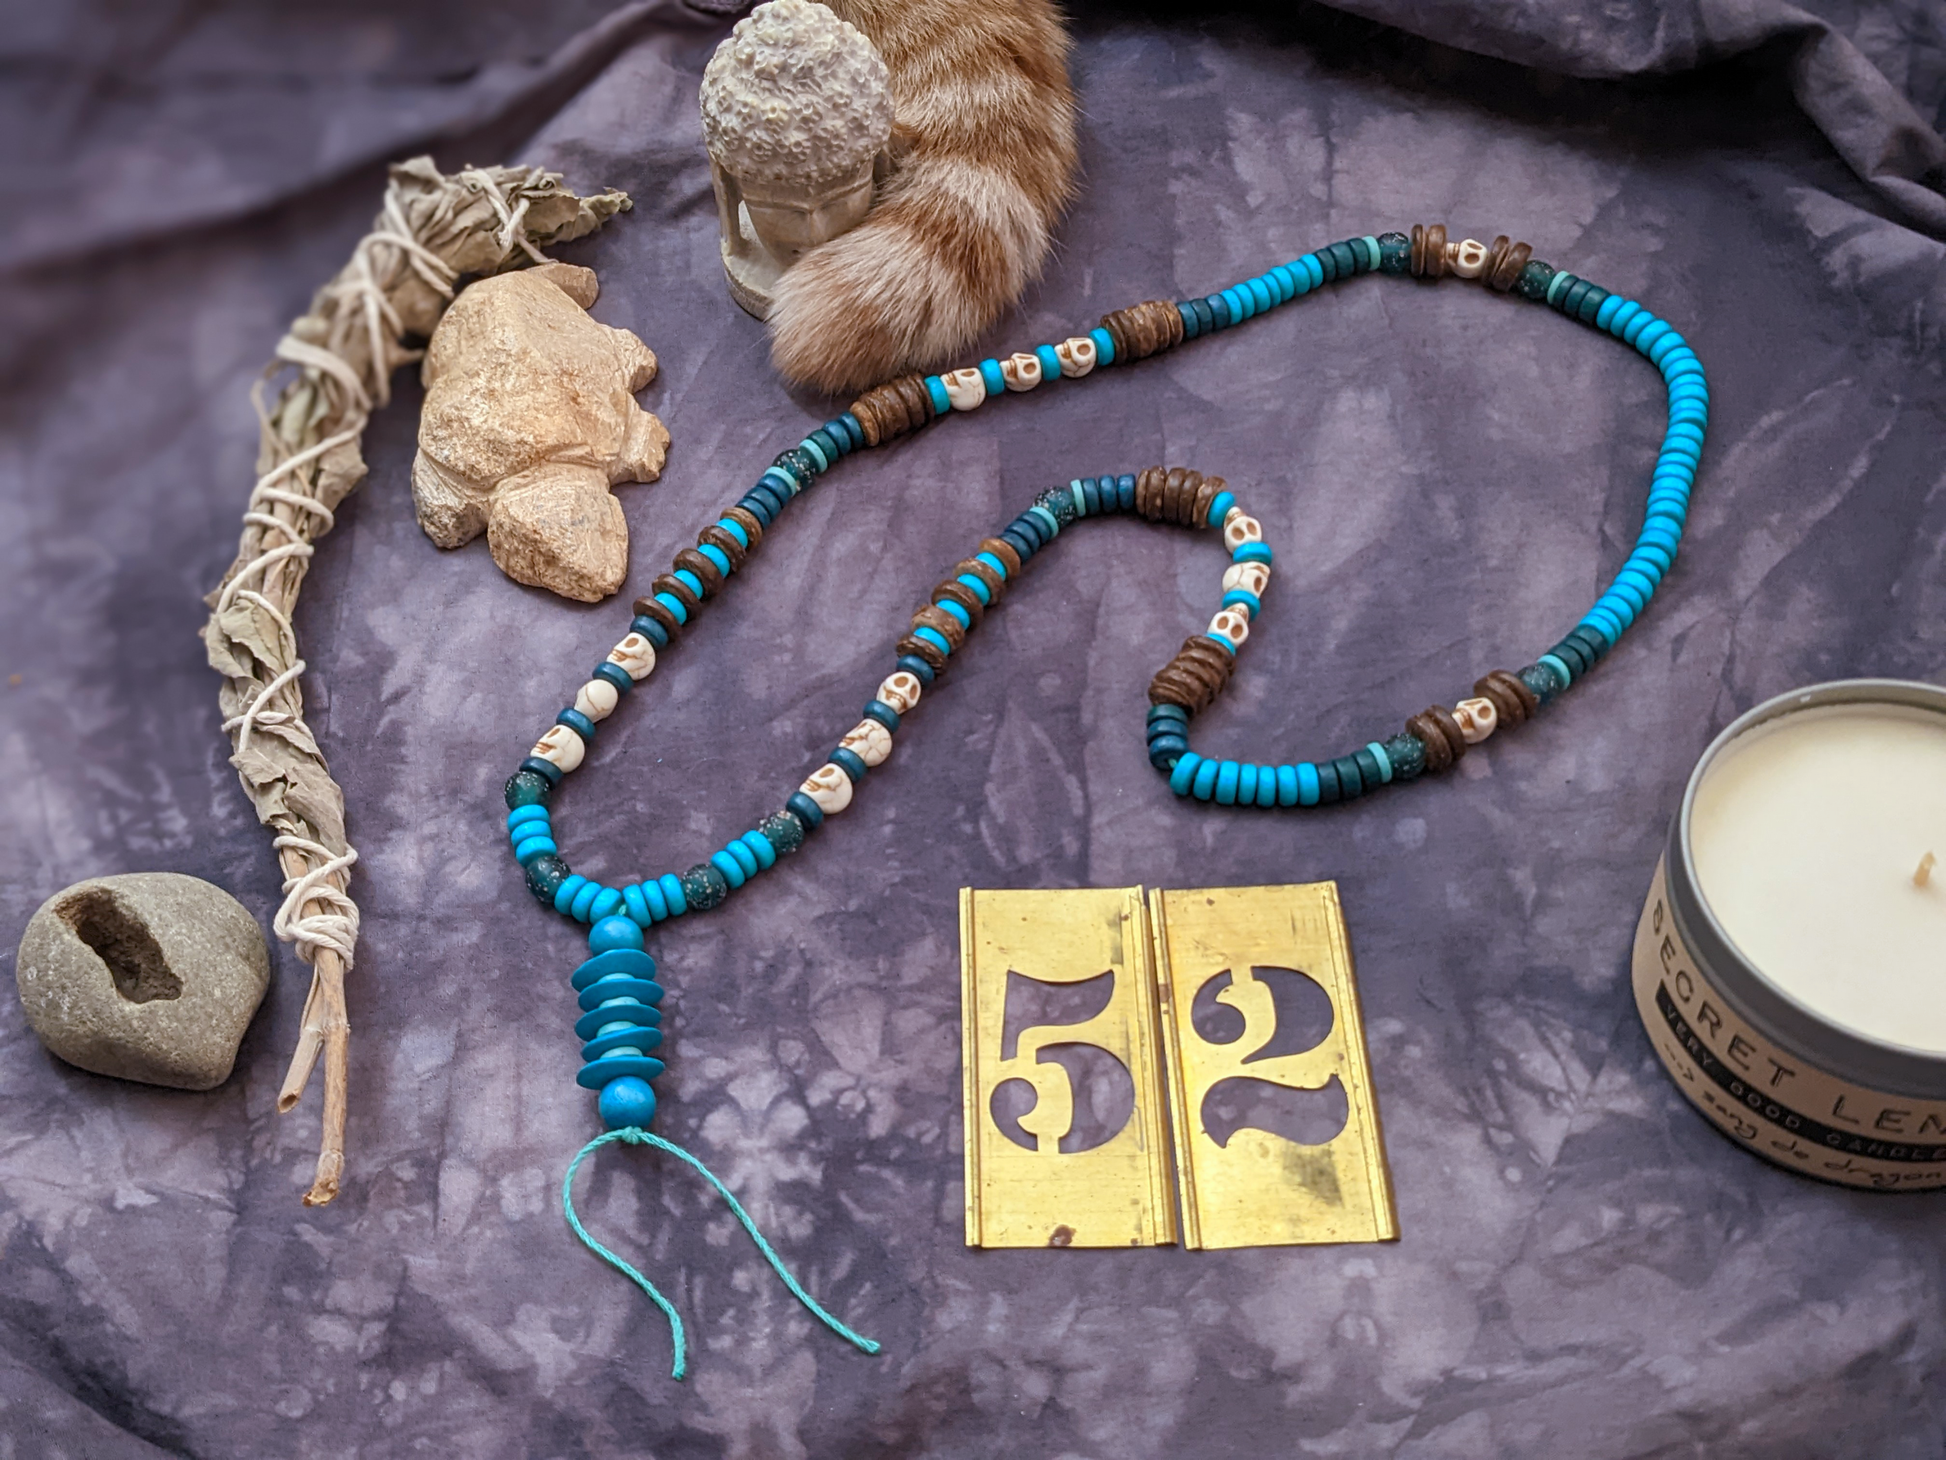 secret lentil soothsayer beads necklace in aqua, teal, cocoa brown and SKULLS